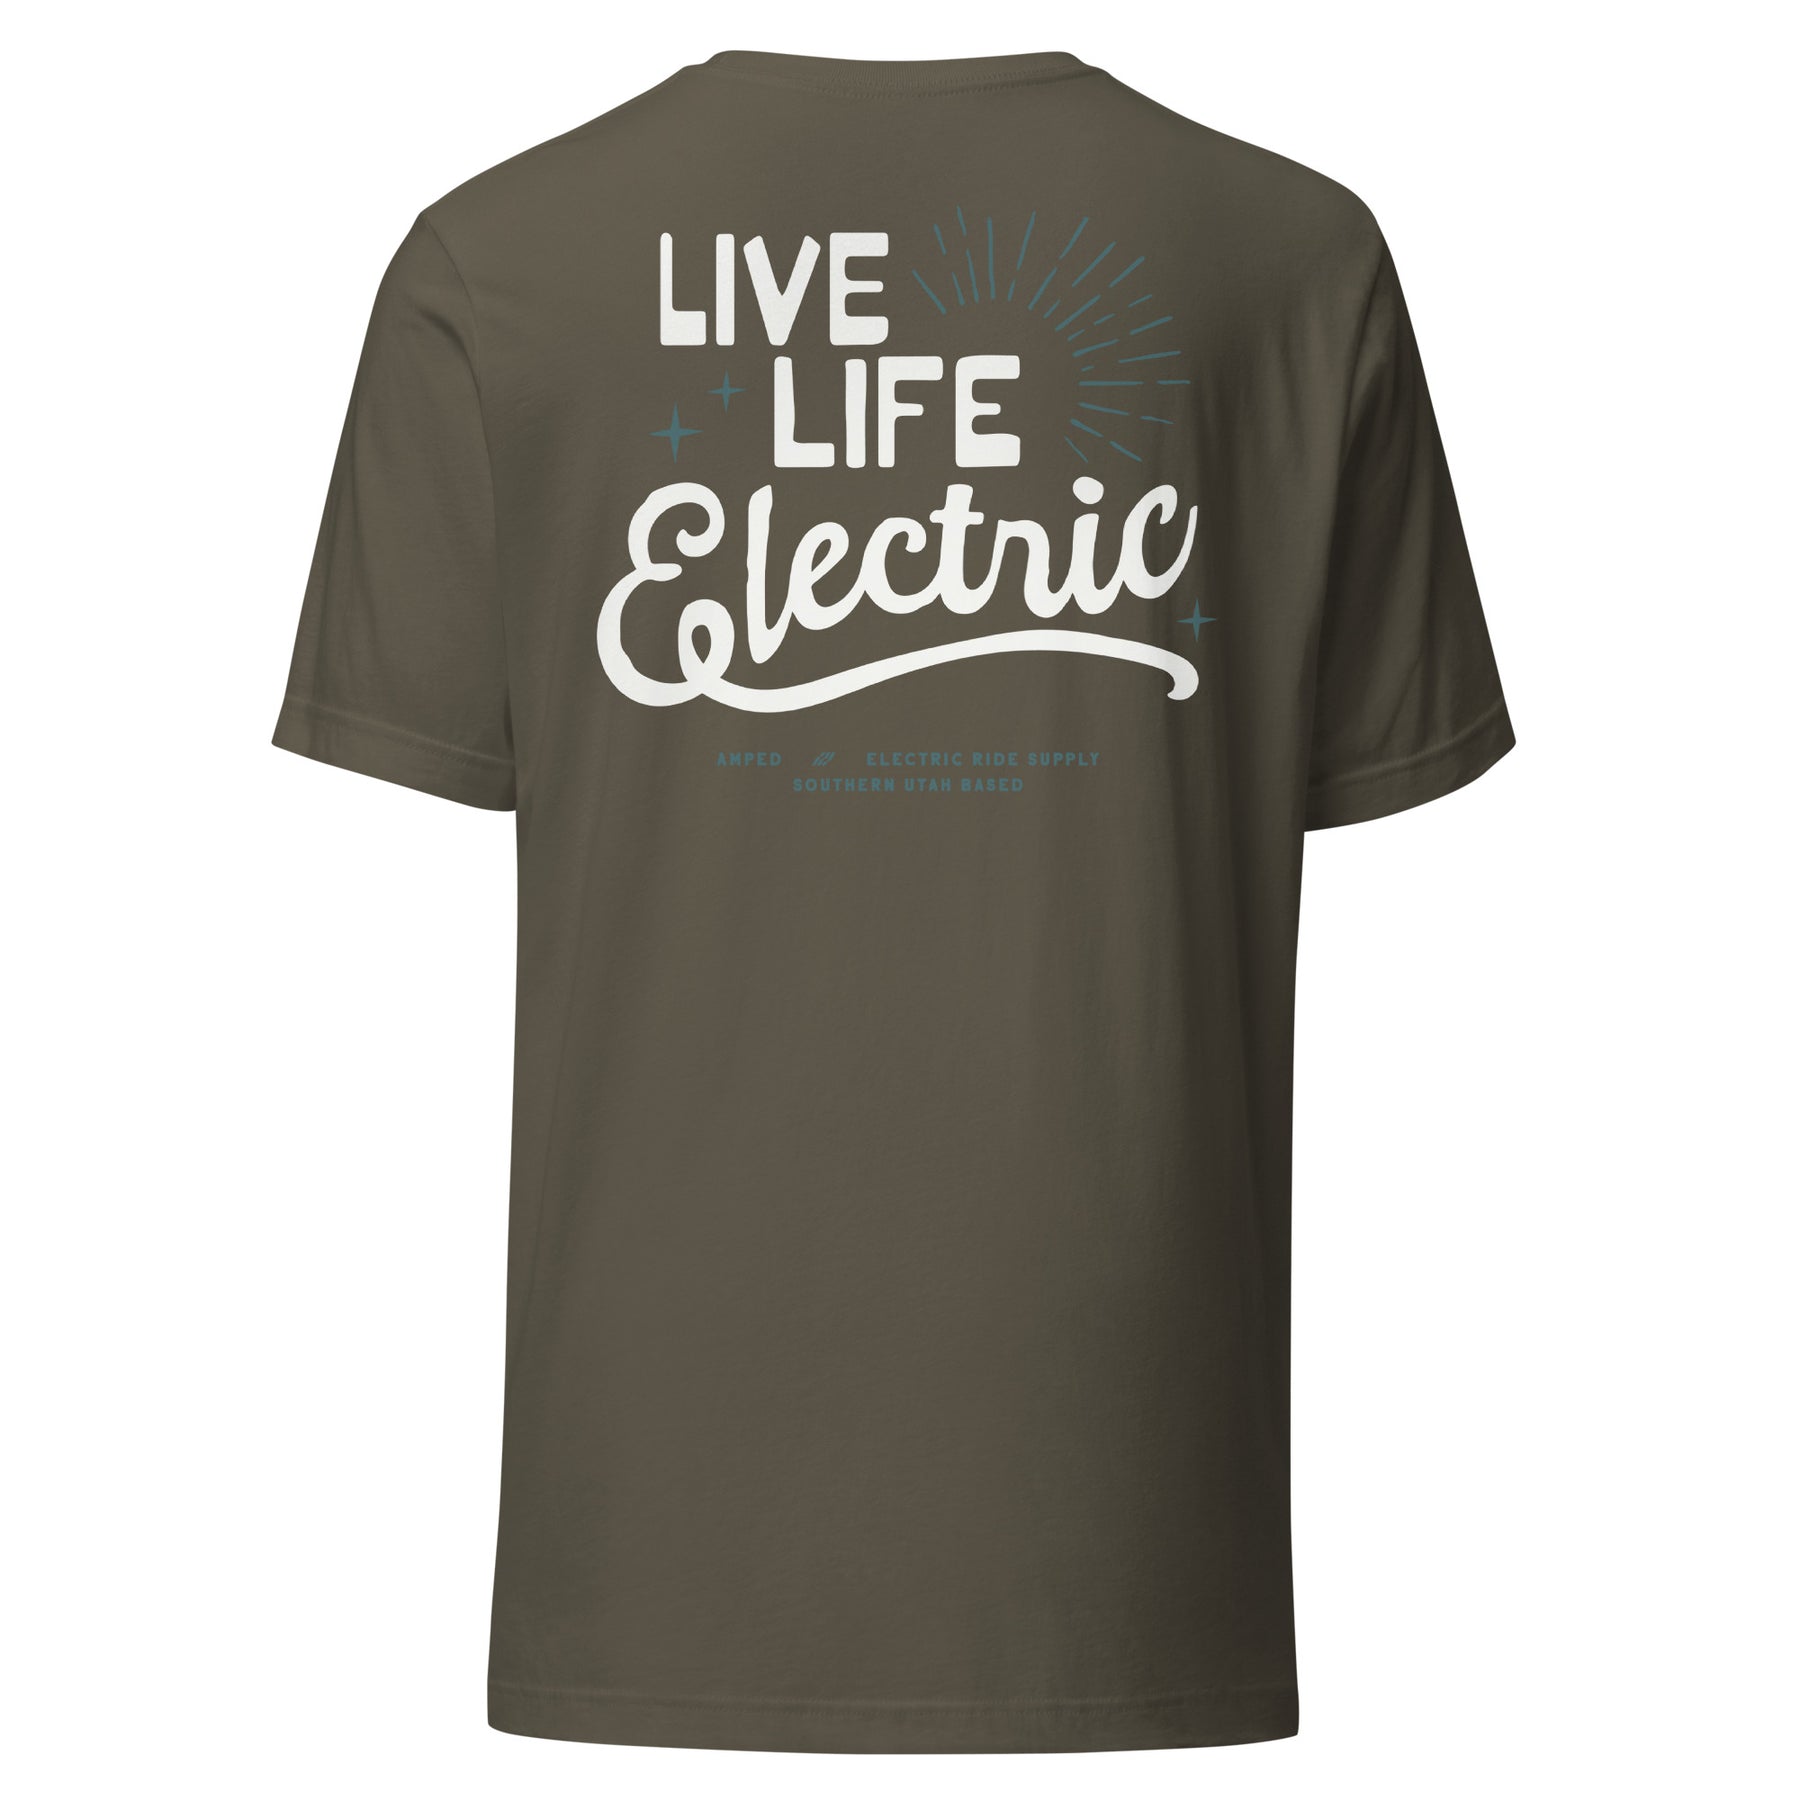 The Live Life Electric Tee 2 Apparel   